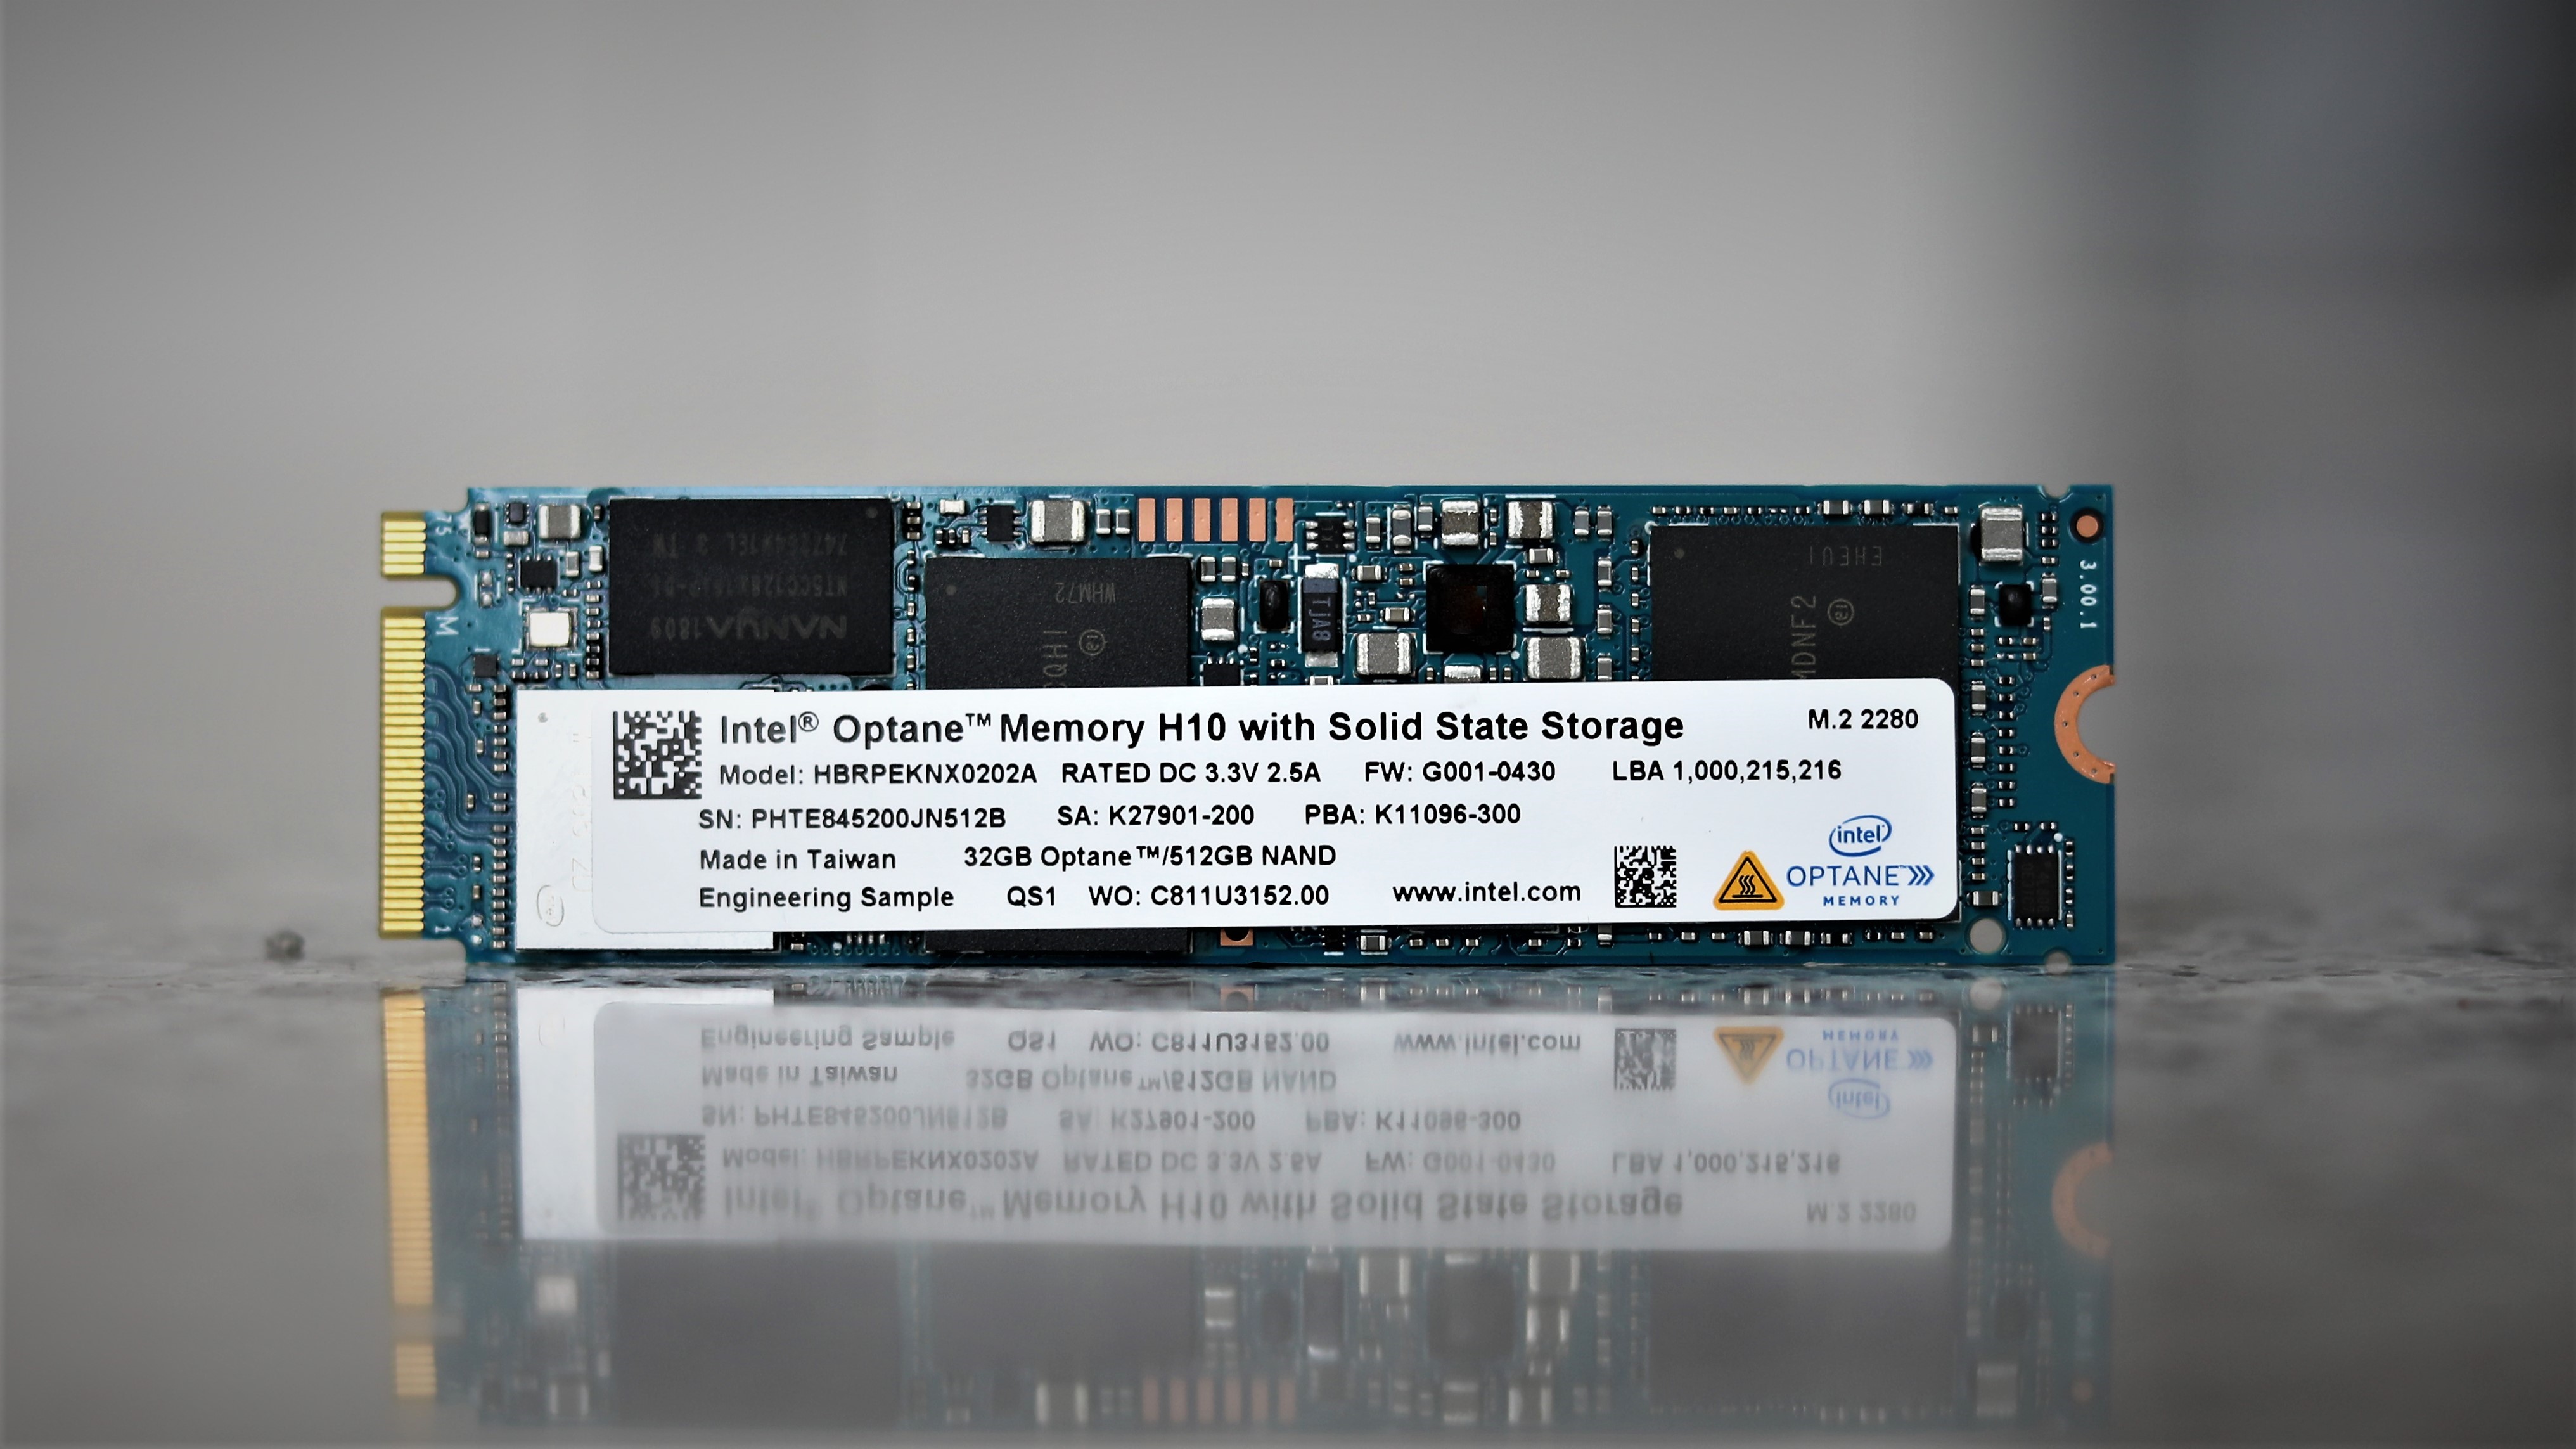 Intel Optane Memory H10 with Solid State Storage Review (512GB) - Recognizing Hot Performance Again | The SSD Review